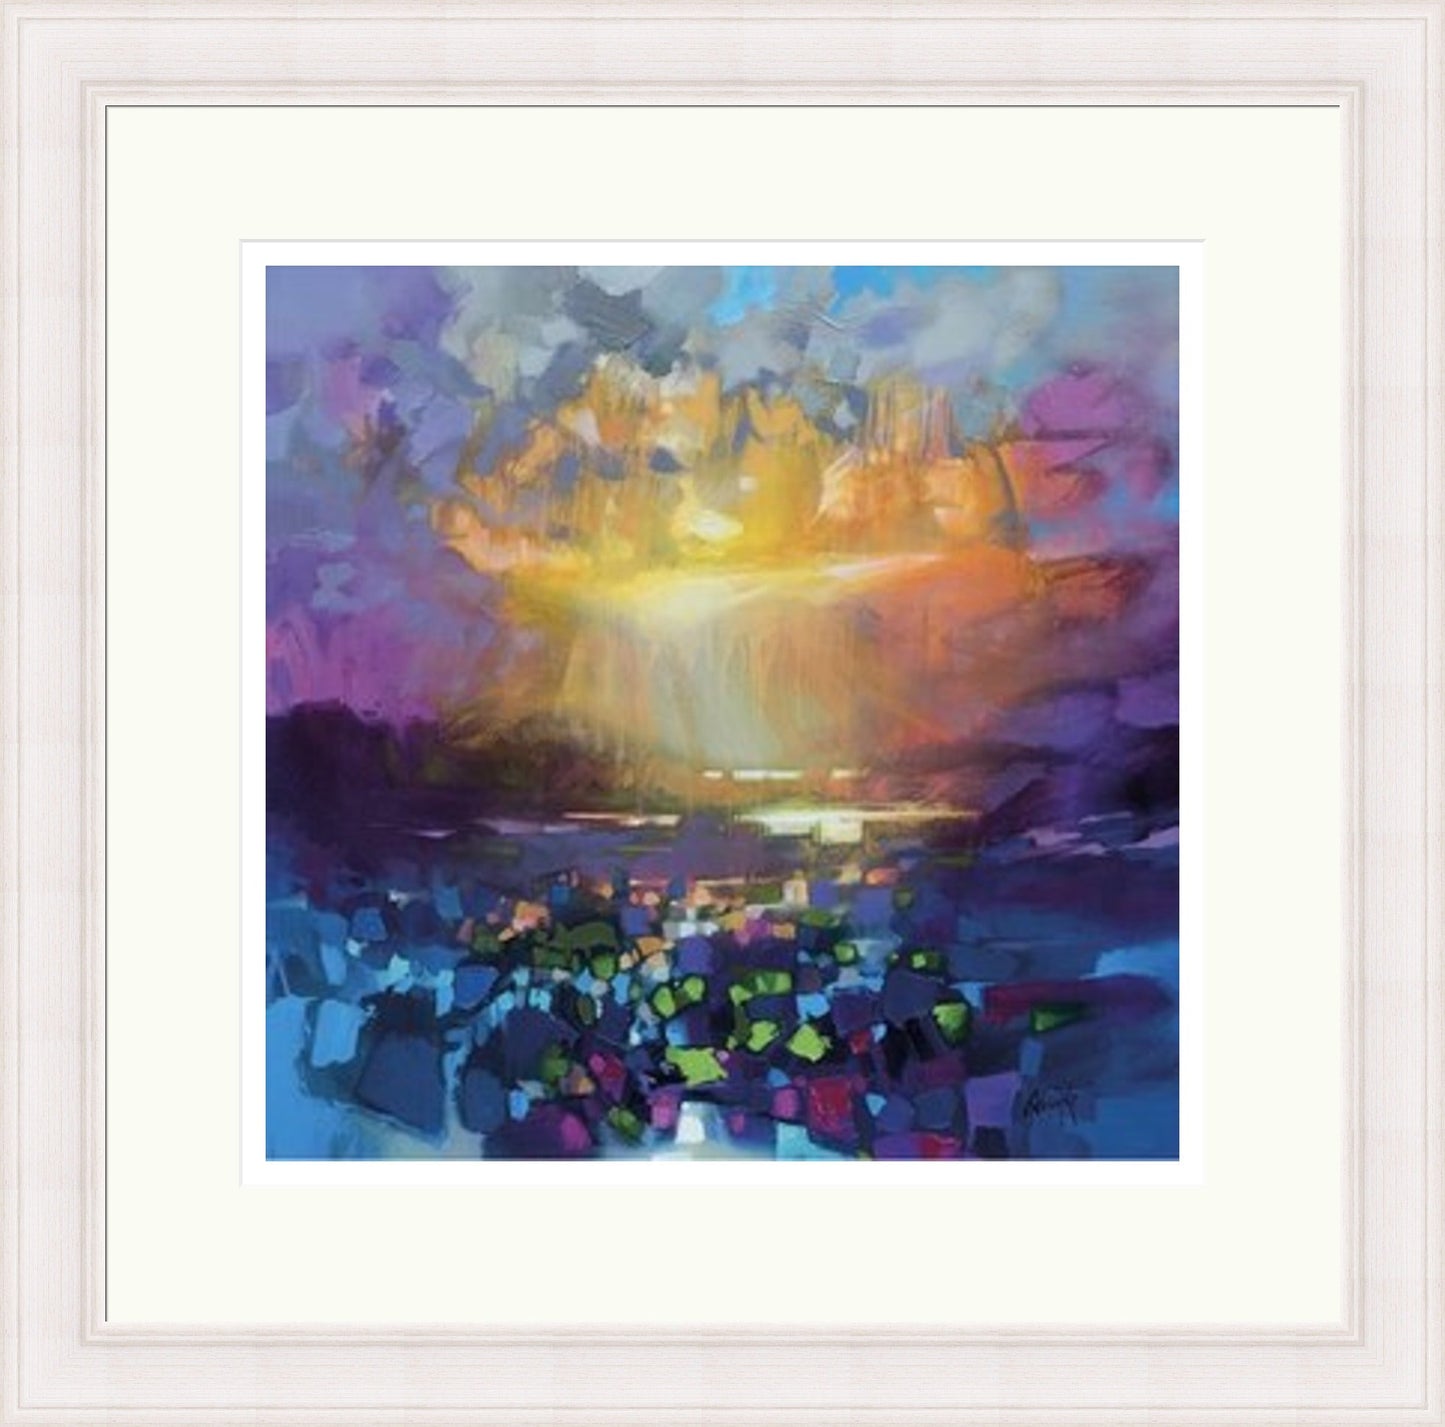 Express Delivery Liquid Skye by Scott Naismith